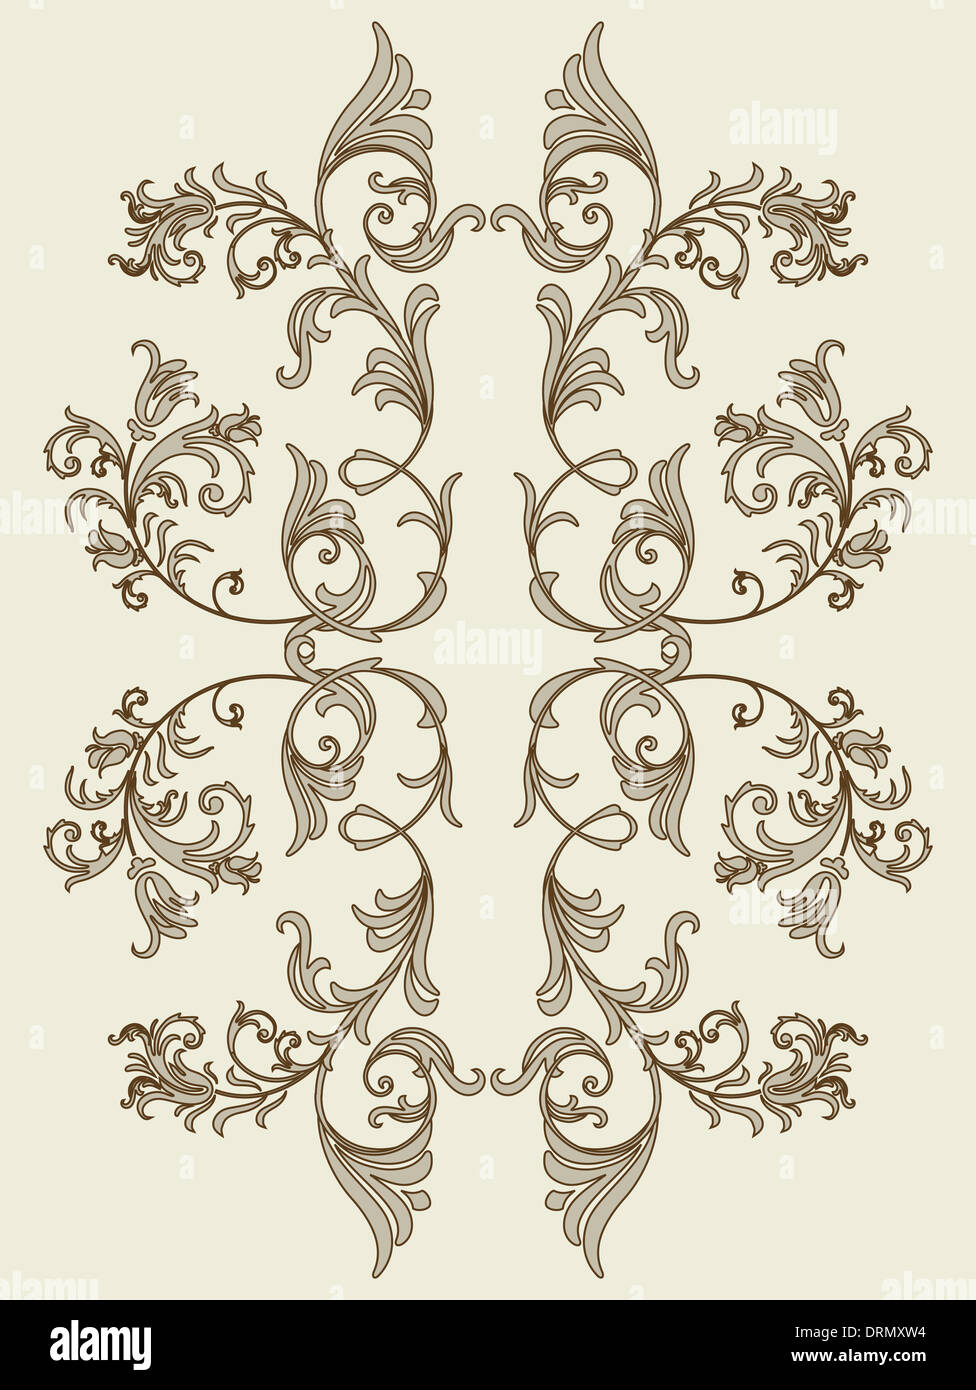 vintage floral element for seamless texture Stock Photo